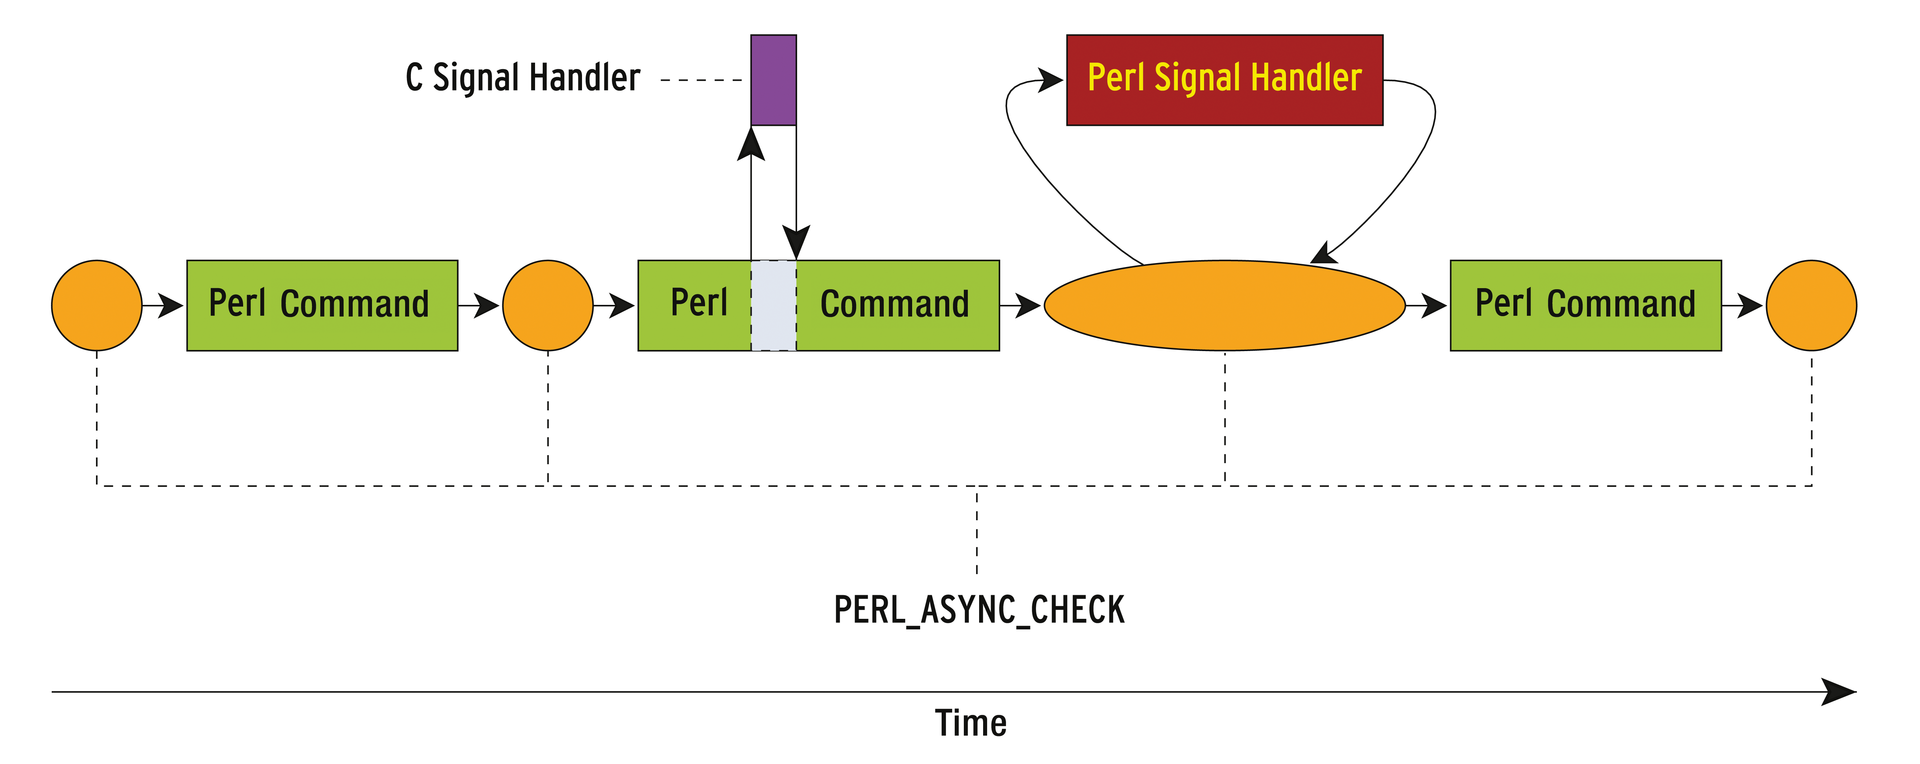 Secure Signals: The C signal handler only sets the flags. The Perl signal handler then runs separately later to avoid conflicts when accessing global variables. 